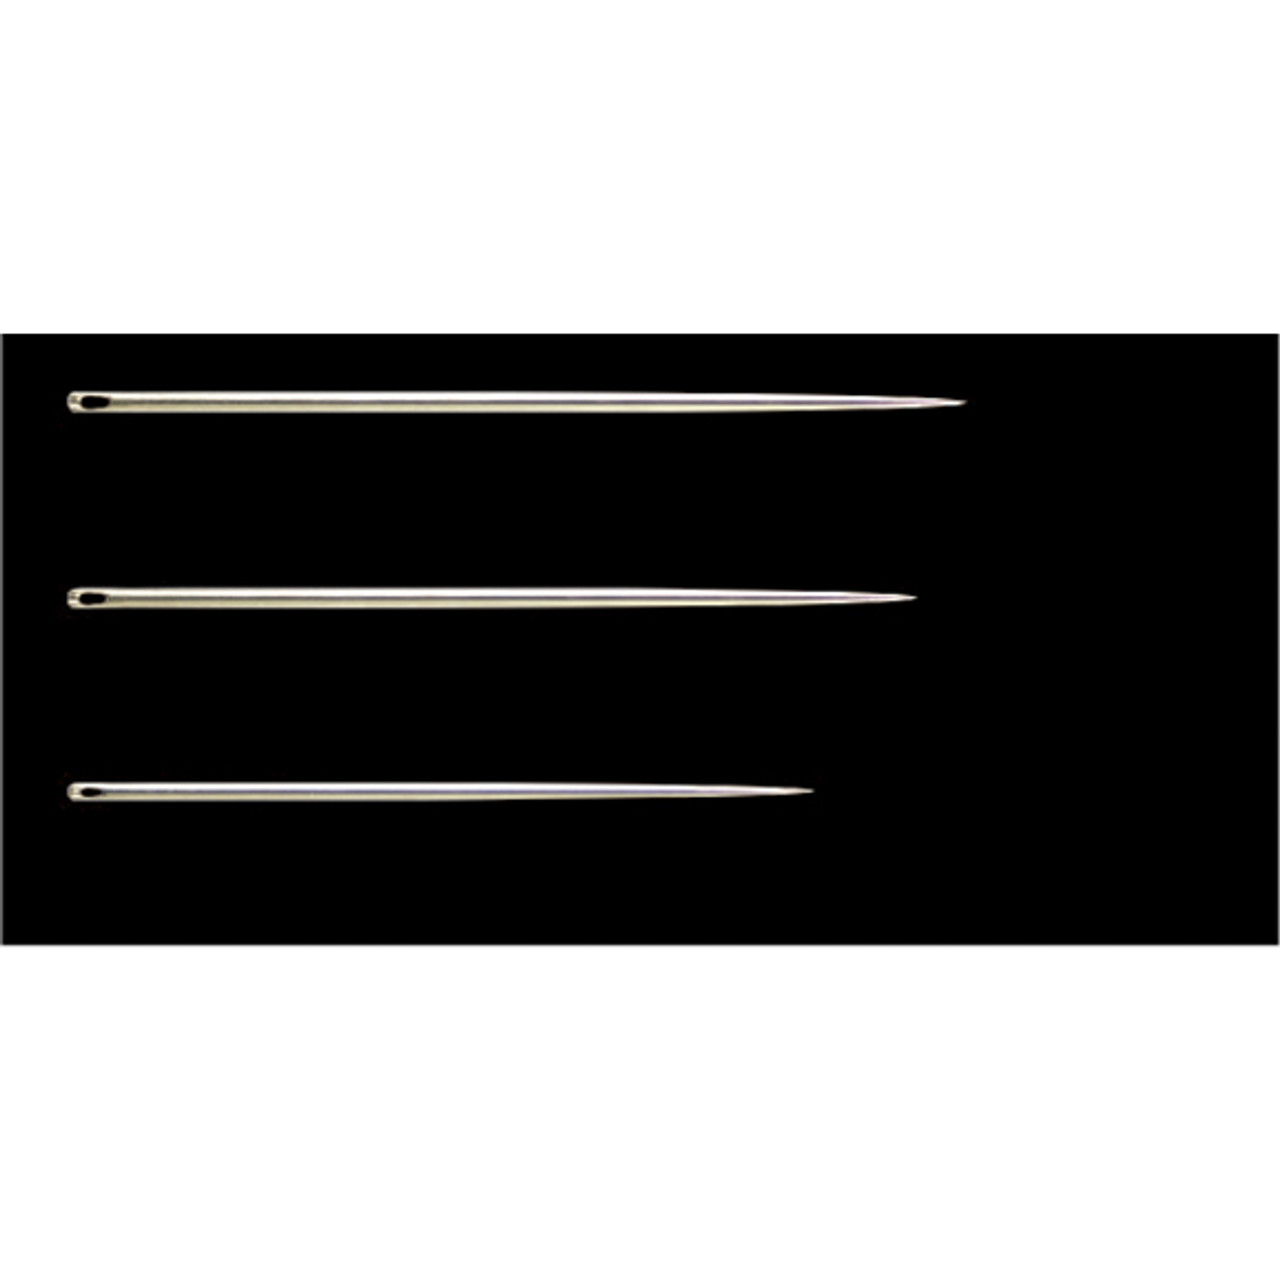 468/10
Quilting Needles(No. 10)
0.56 × 25.8 mm